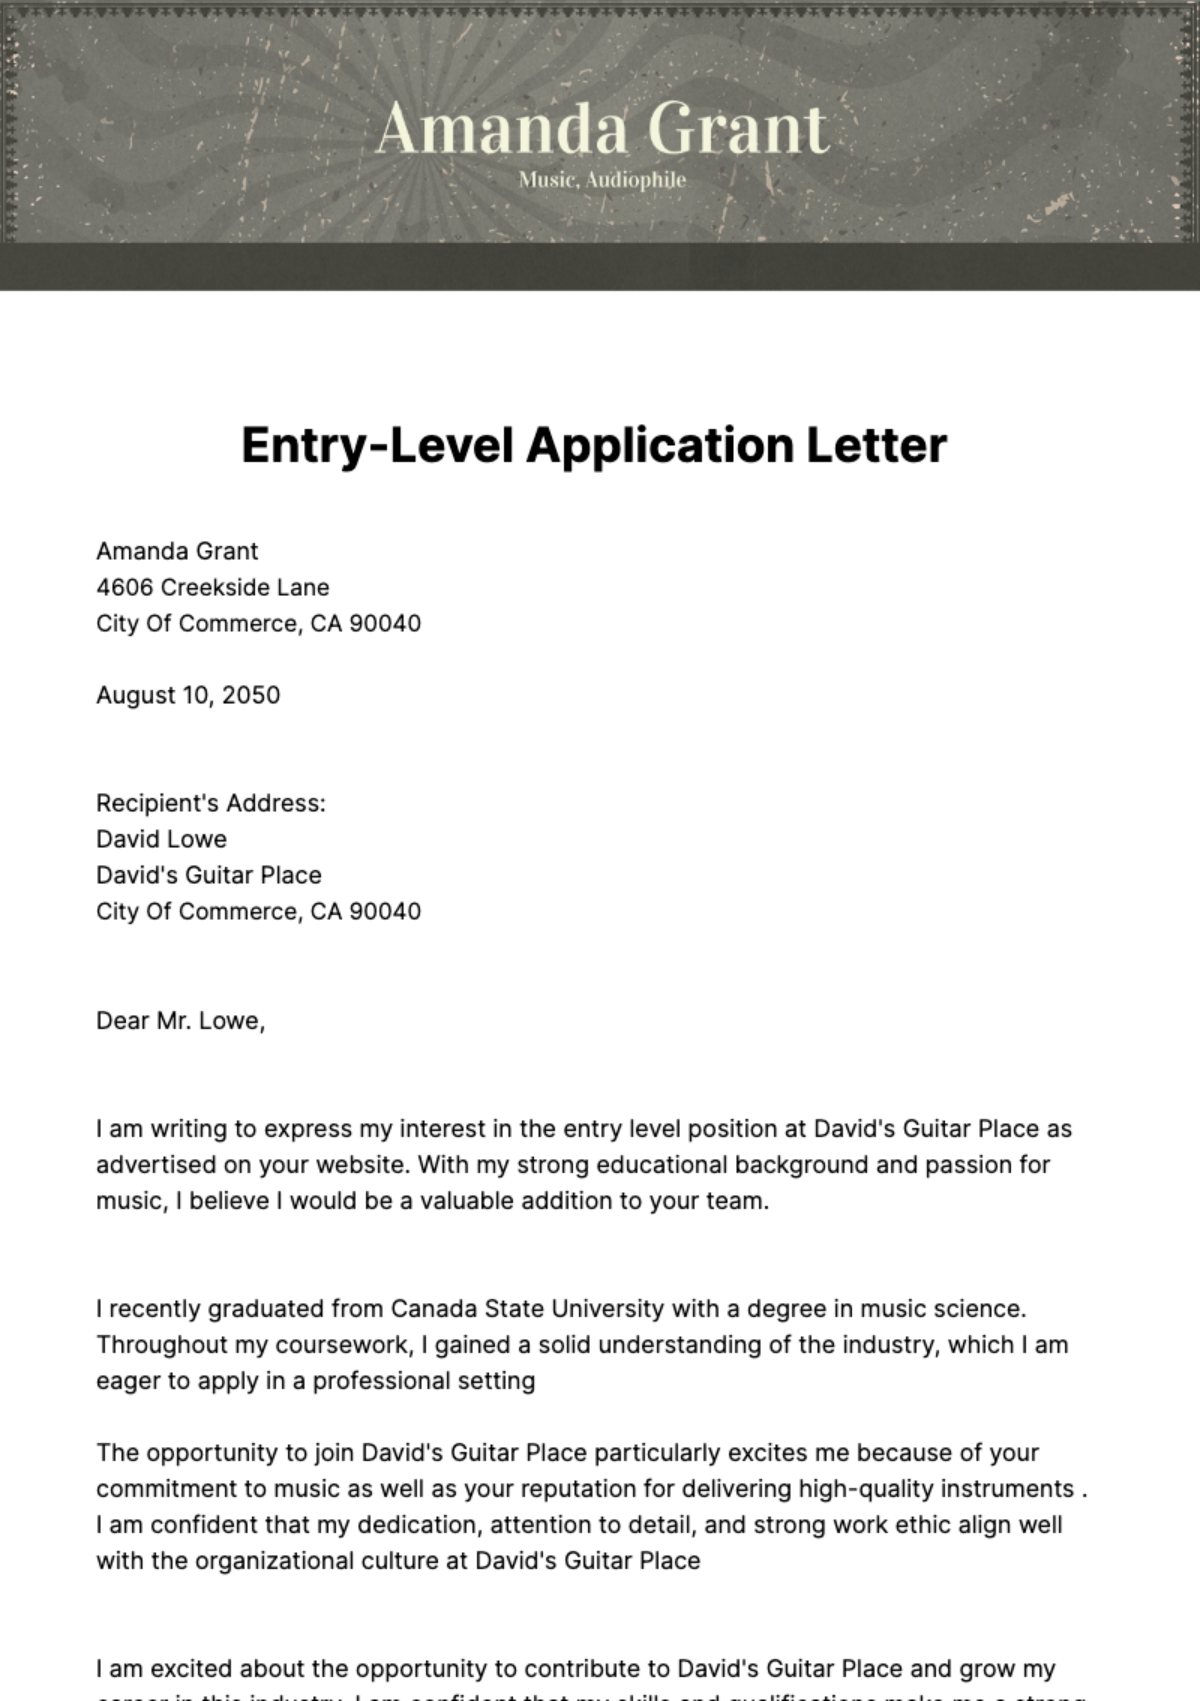 Entry-Level Application Letter Template